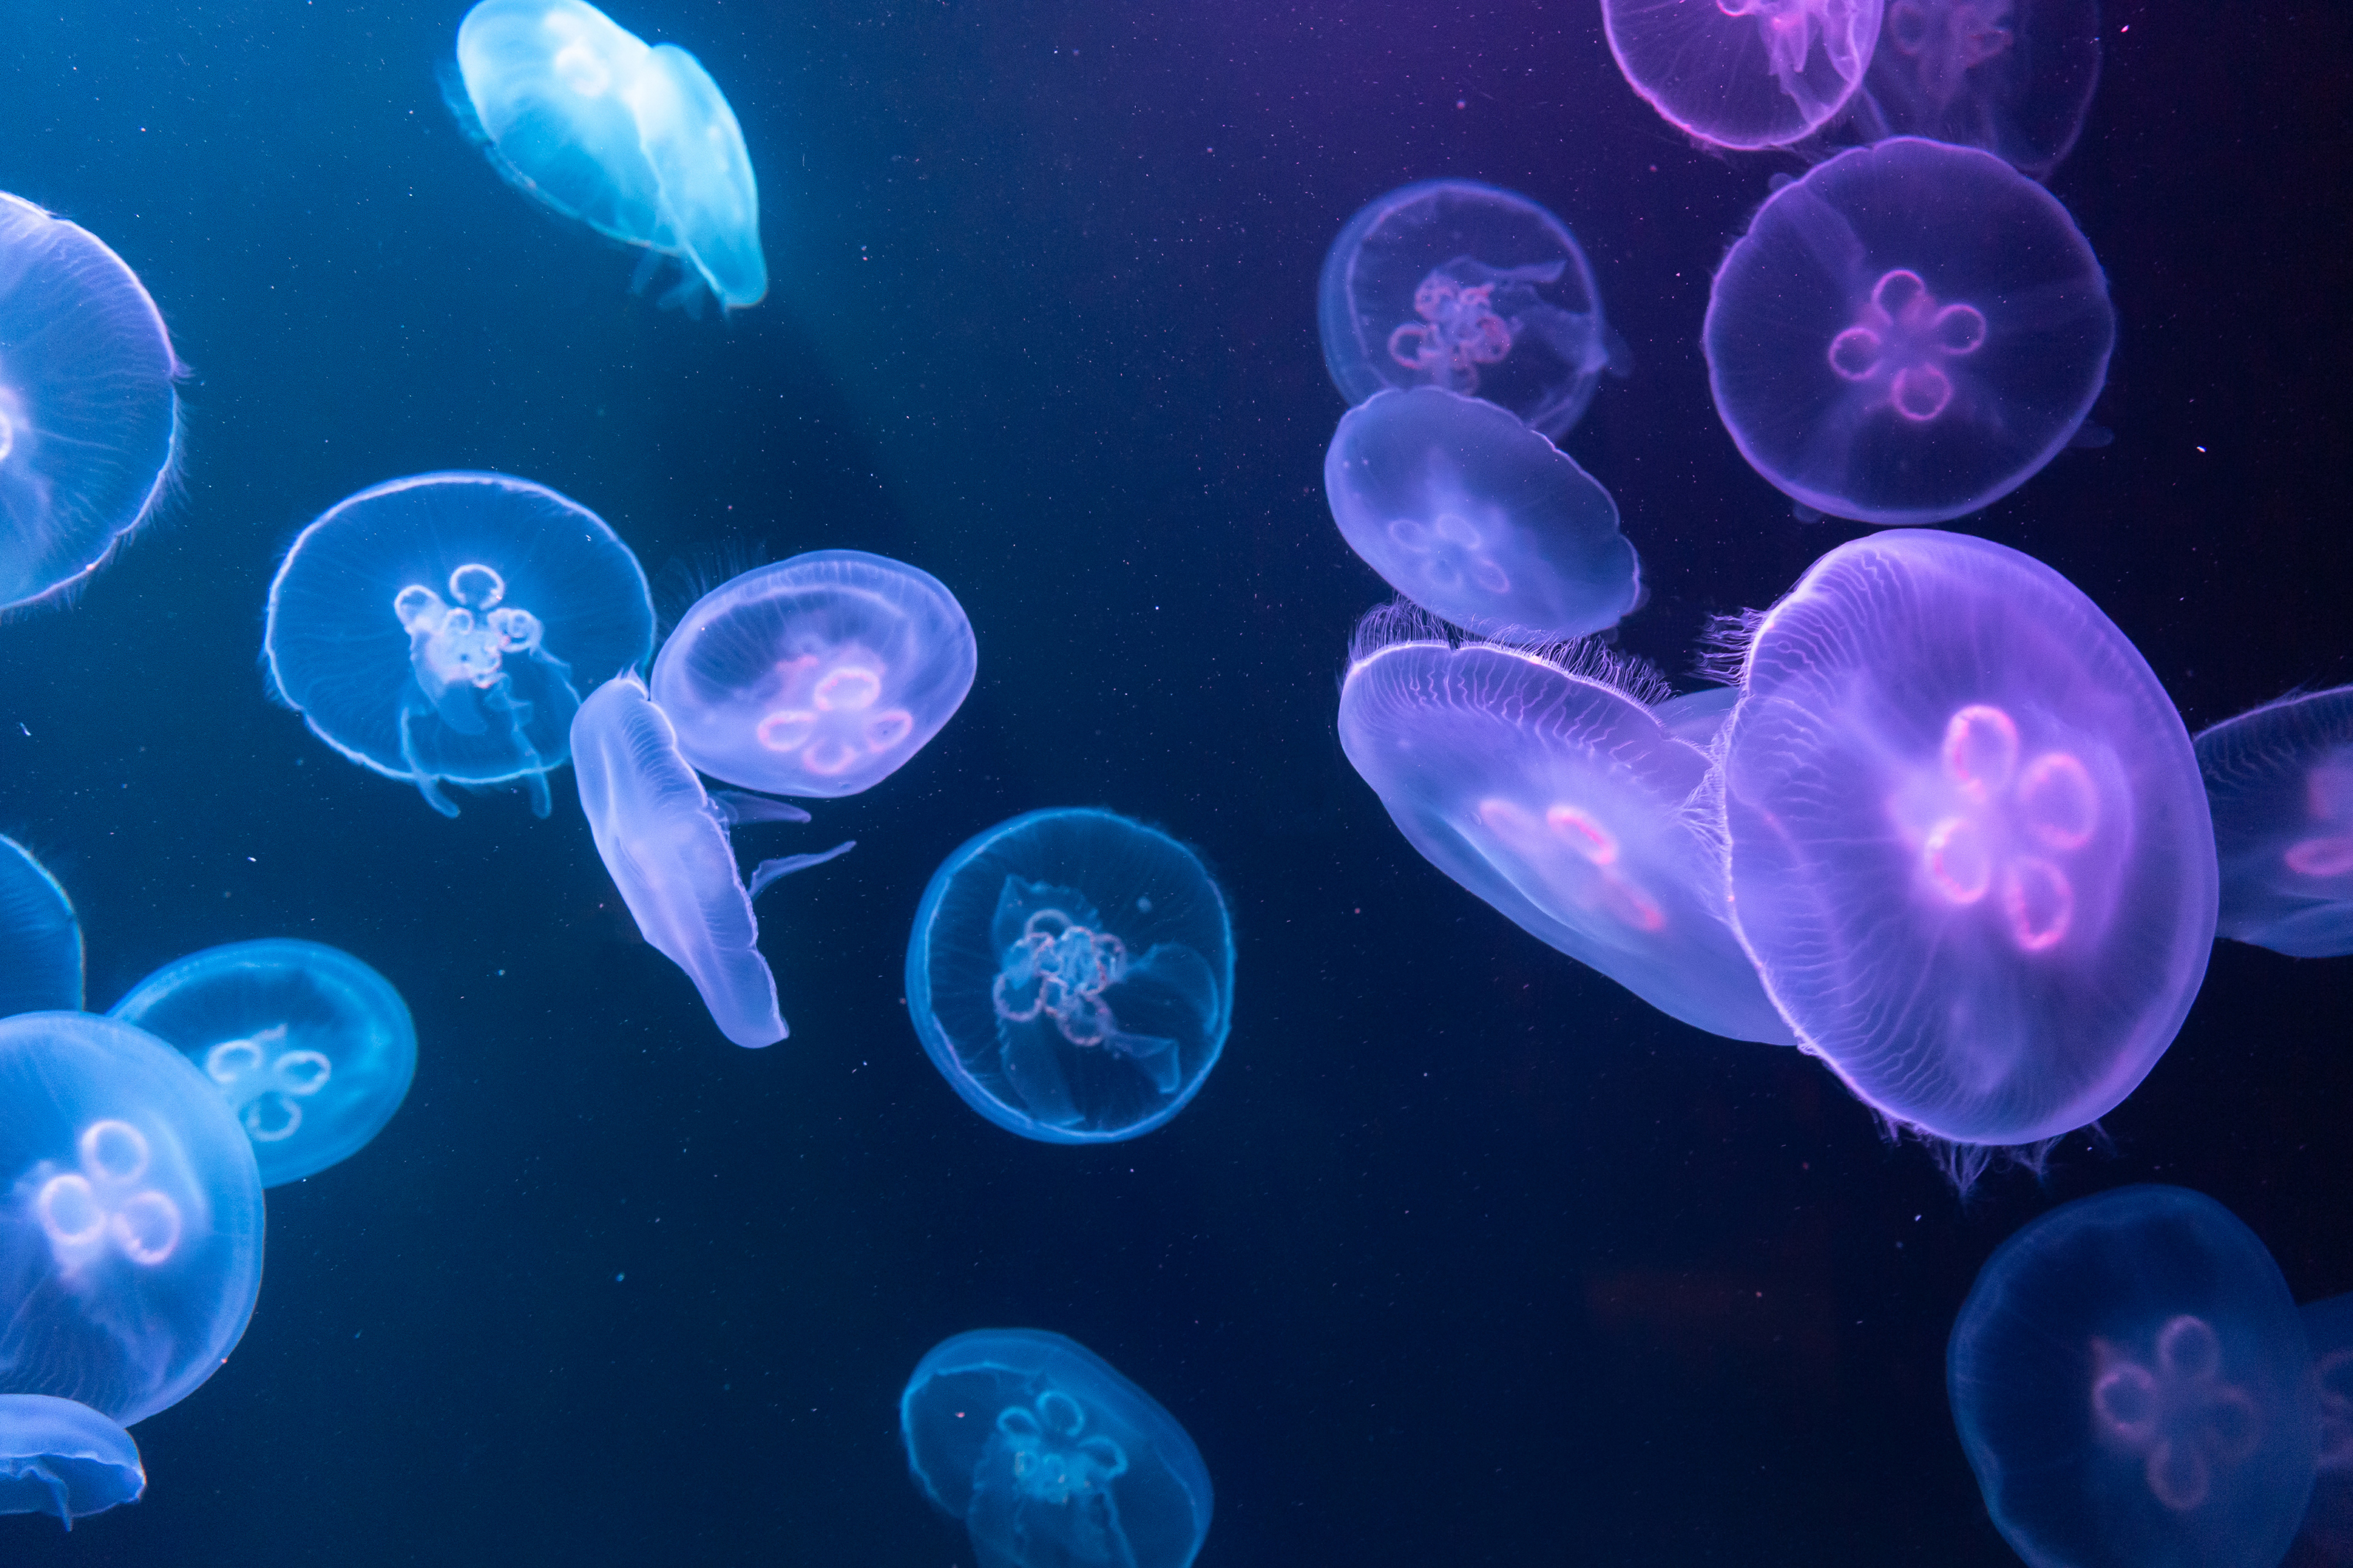 The picture shows a many jellyfish swimming in blue water